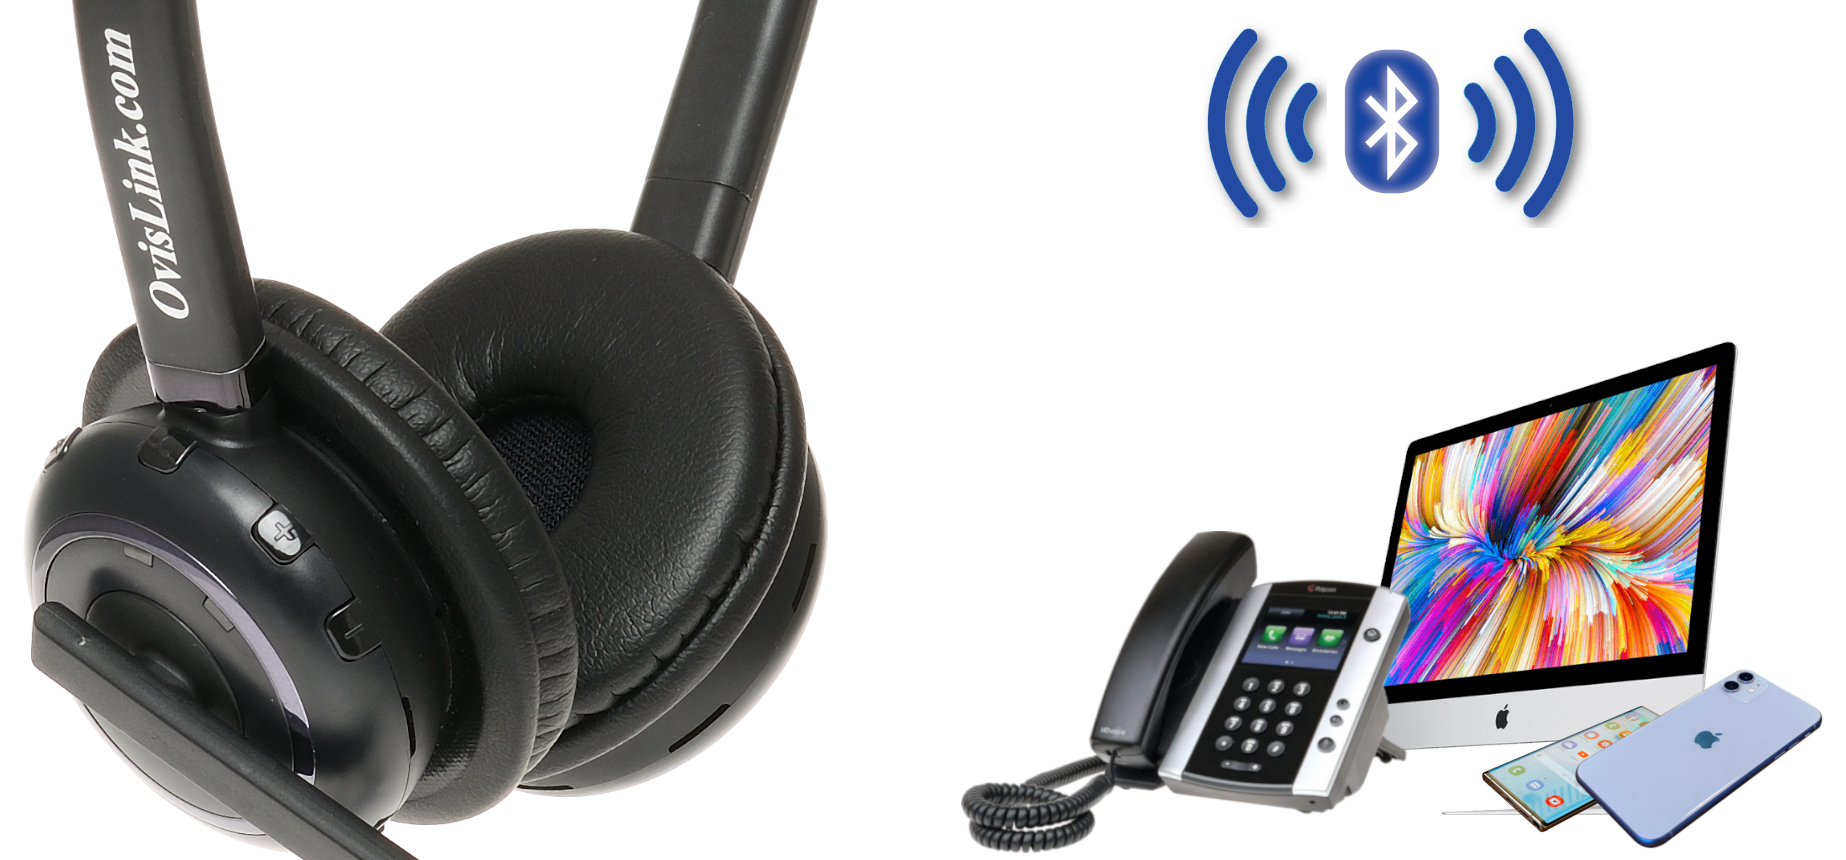 OvisLink wireless headset connects to desktop phone, cell phone and computer through Bluetooth